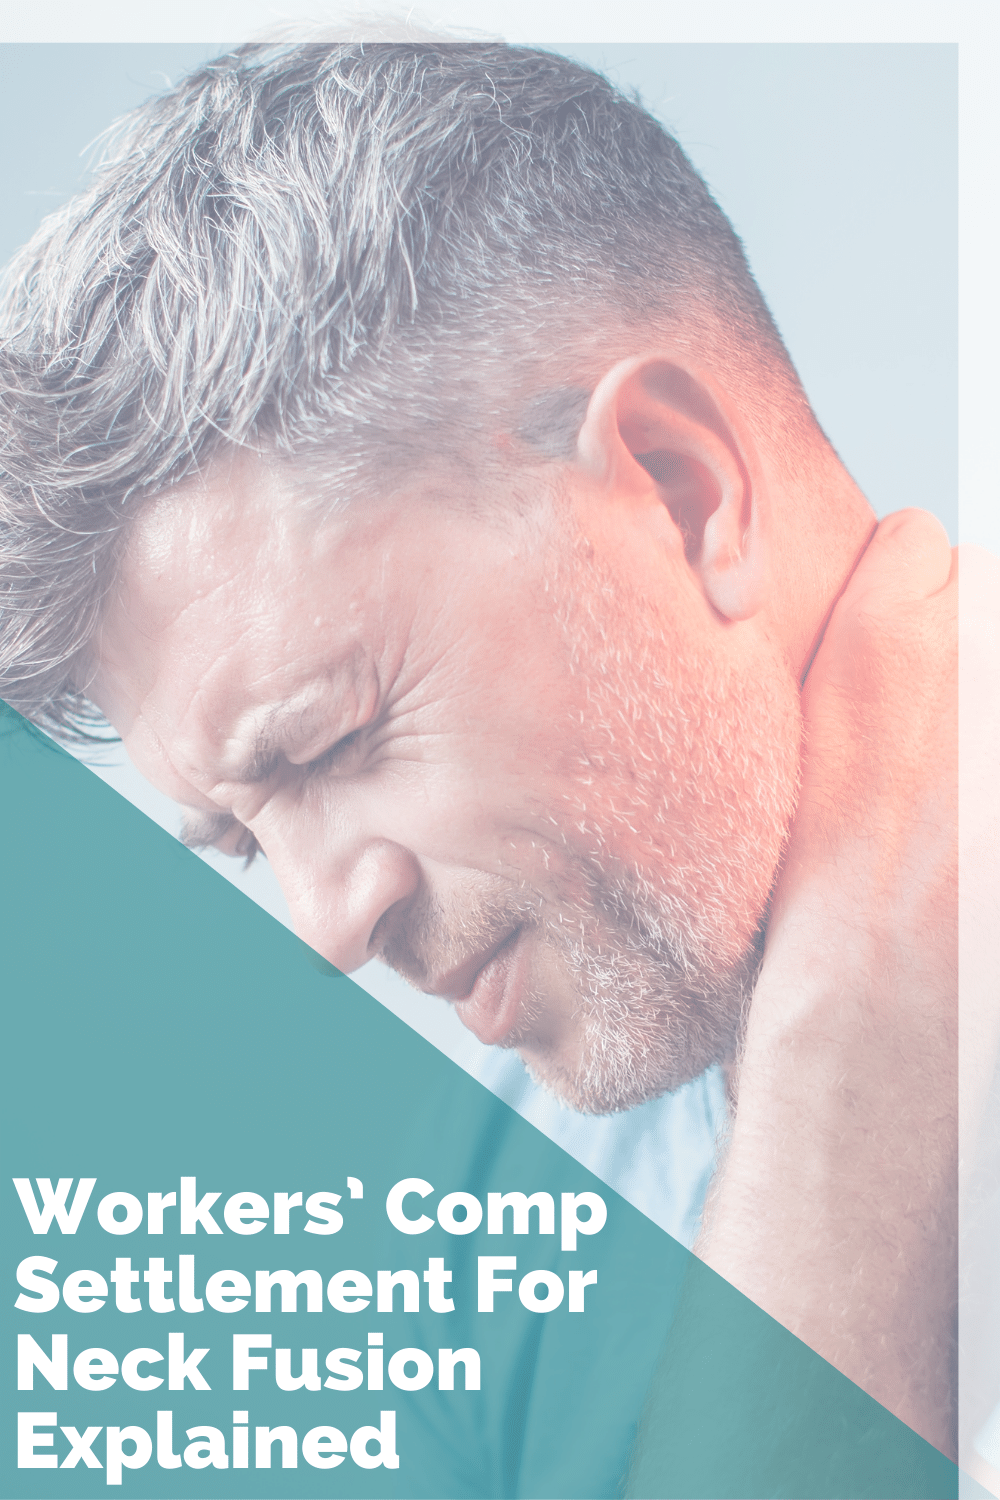 Workers' Comp Settlement For Neck Fusion: What You Need To Know